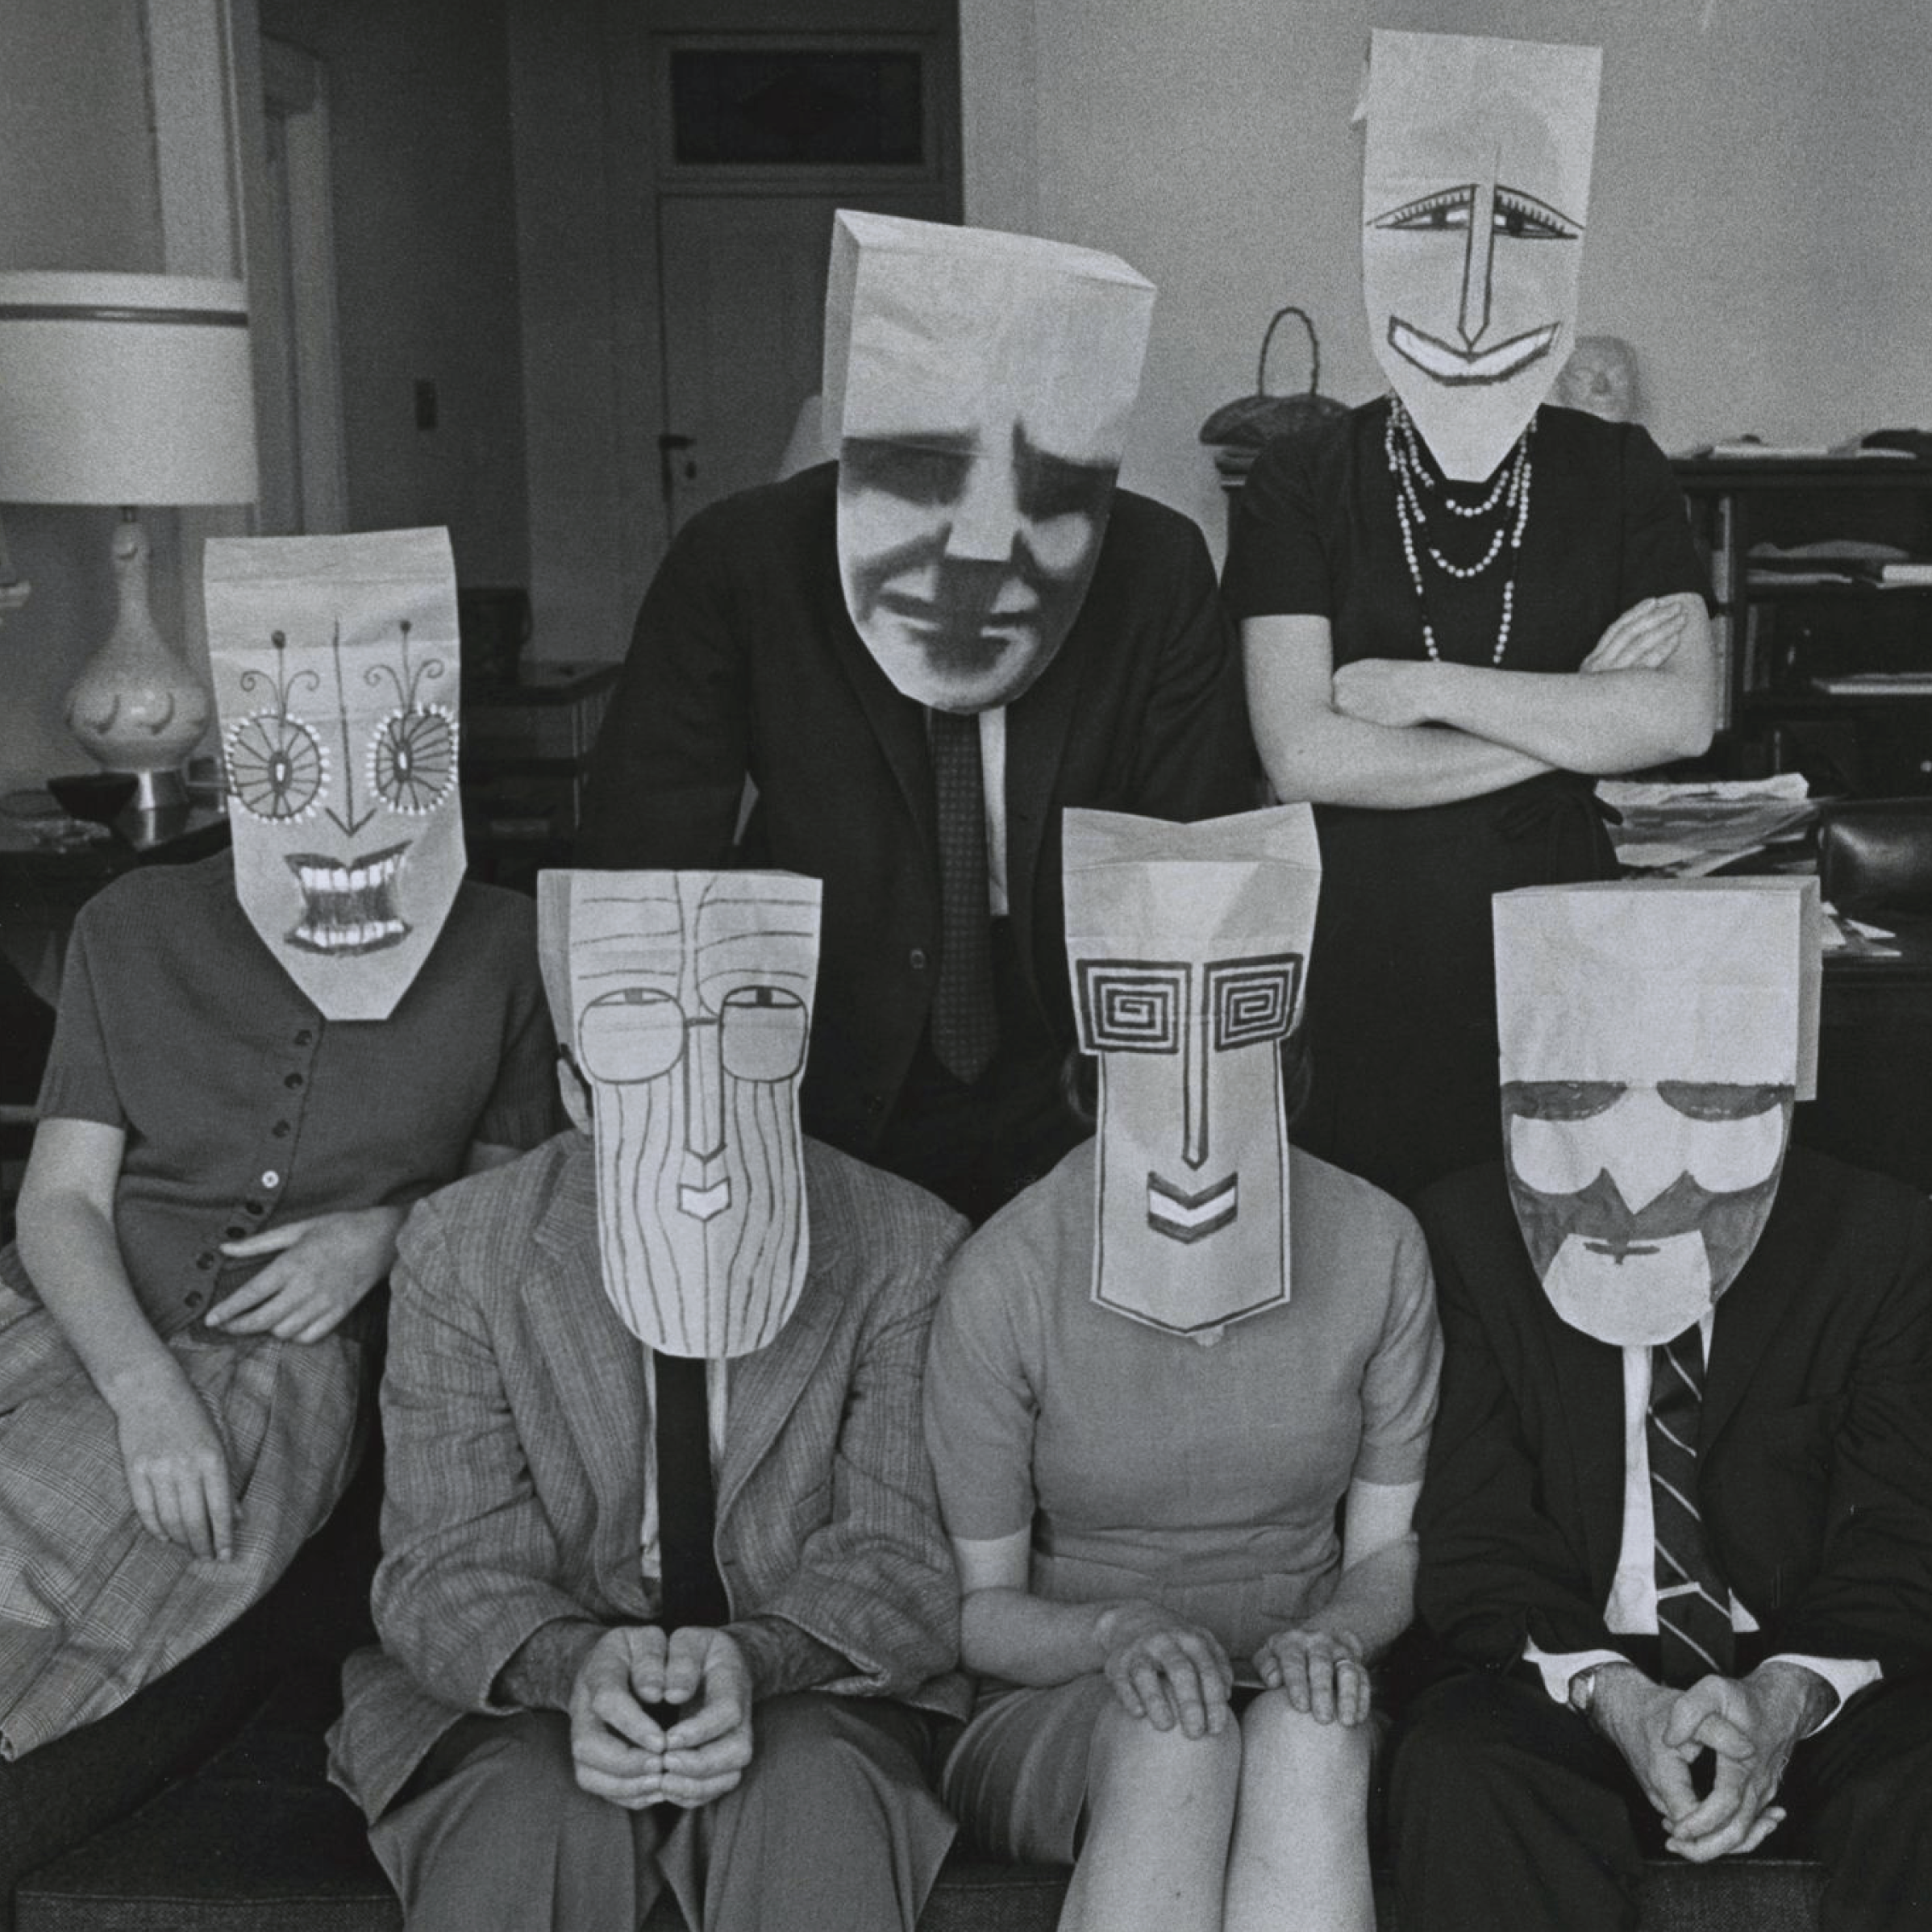  Untitled (from the Mask Series with Saul Steinberg), USA, 1962. Photo by Inge Morath. 